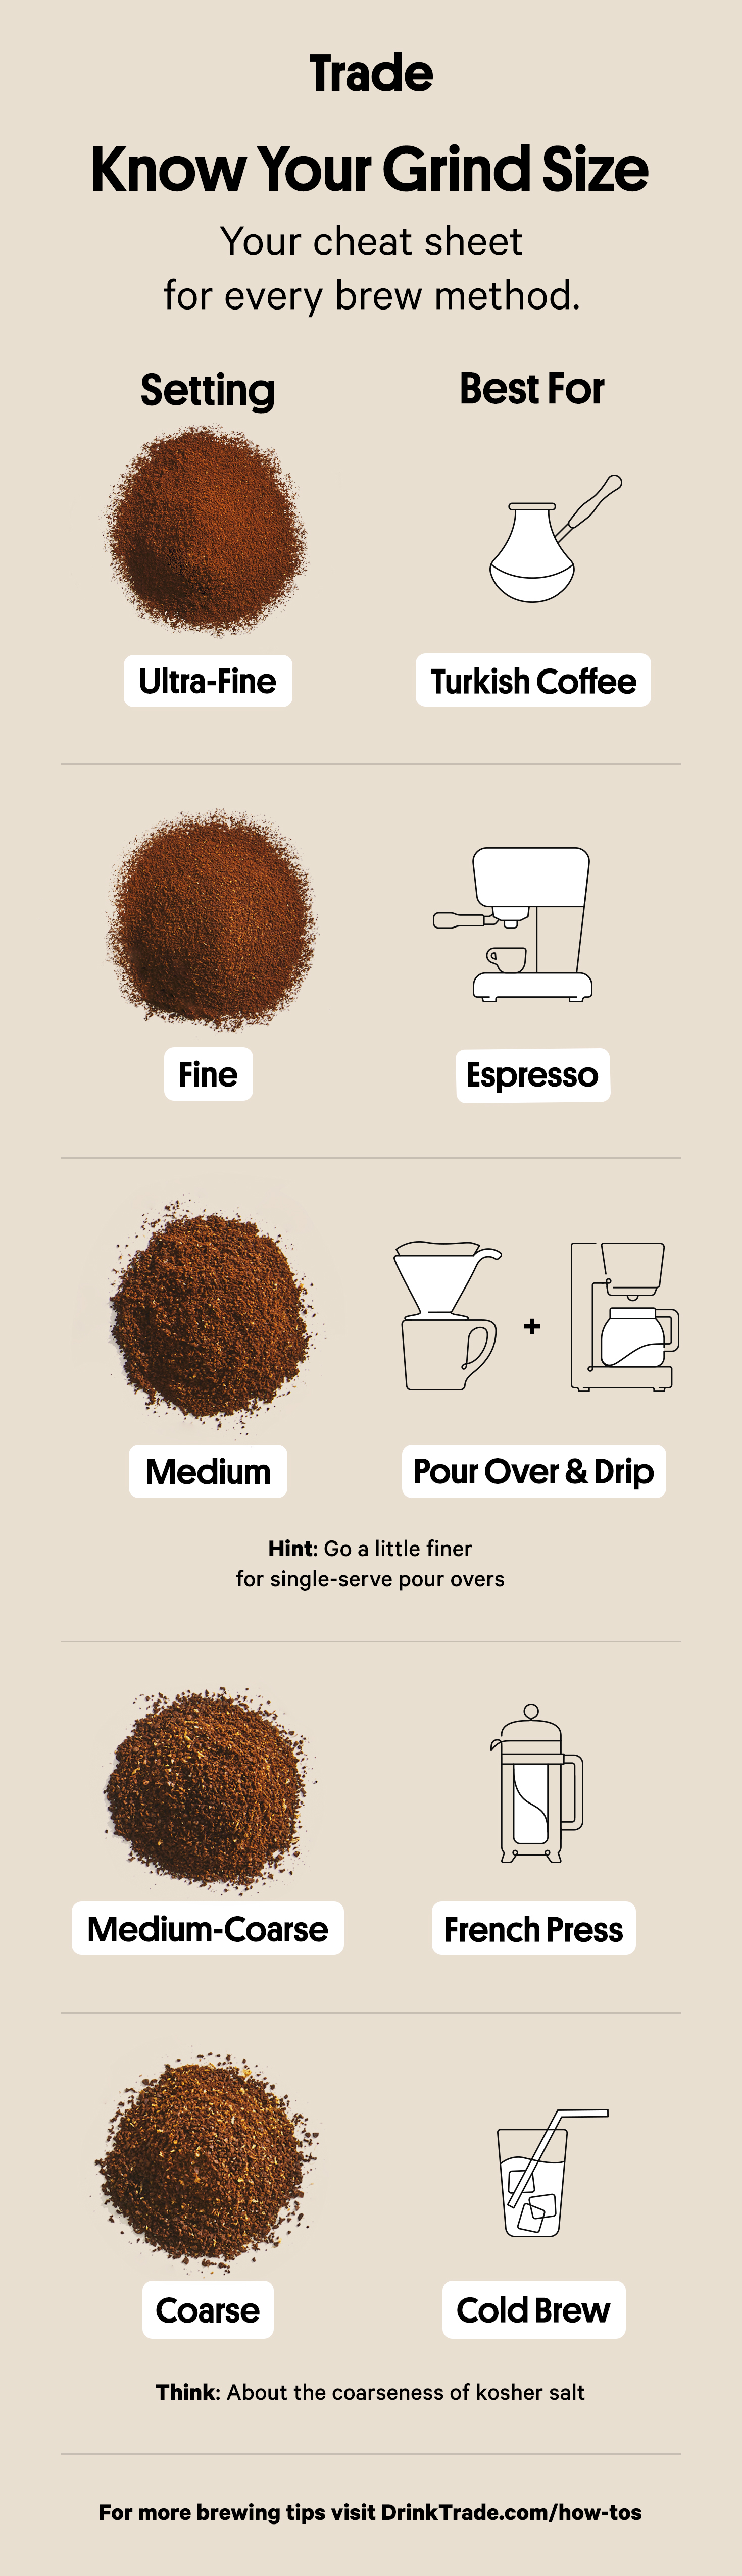 An infographic featuring different grinding consistencies for various coffee brewing methods.